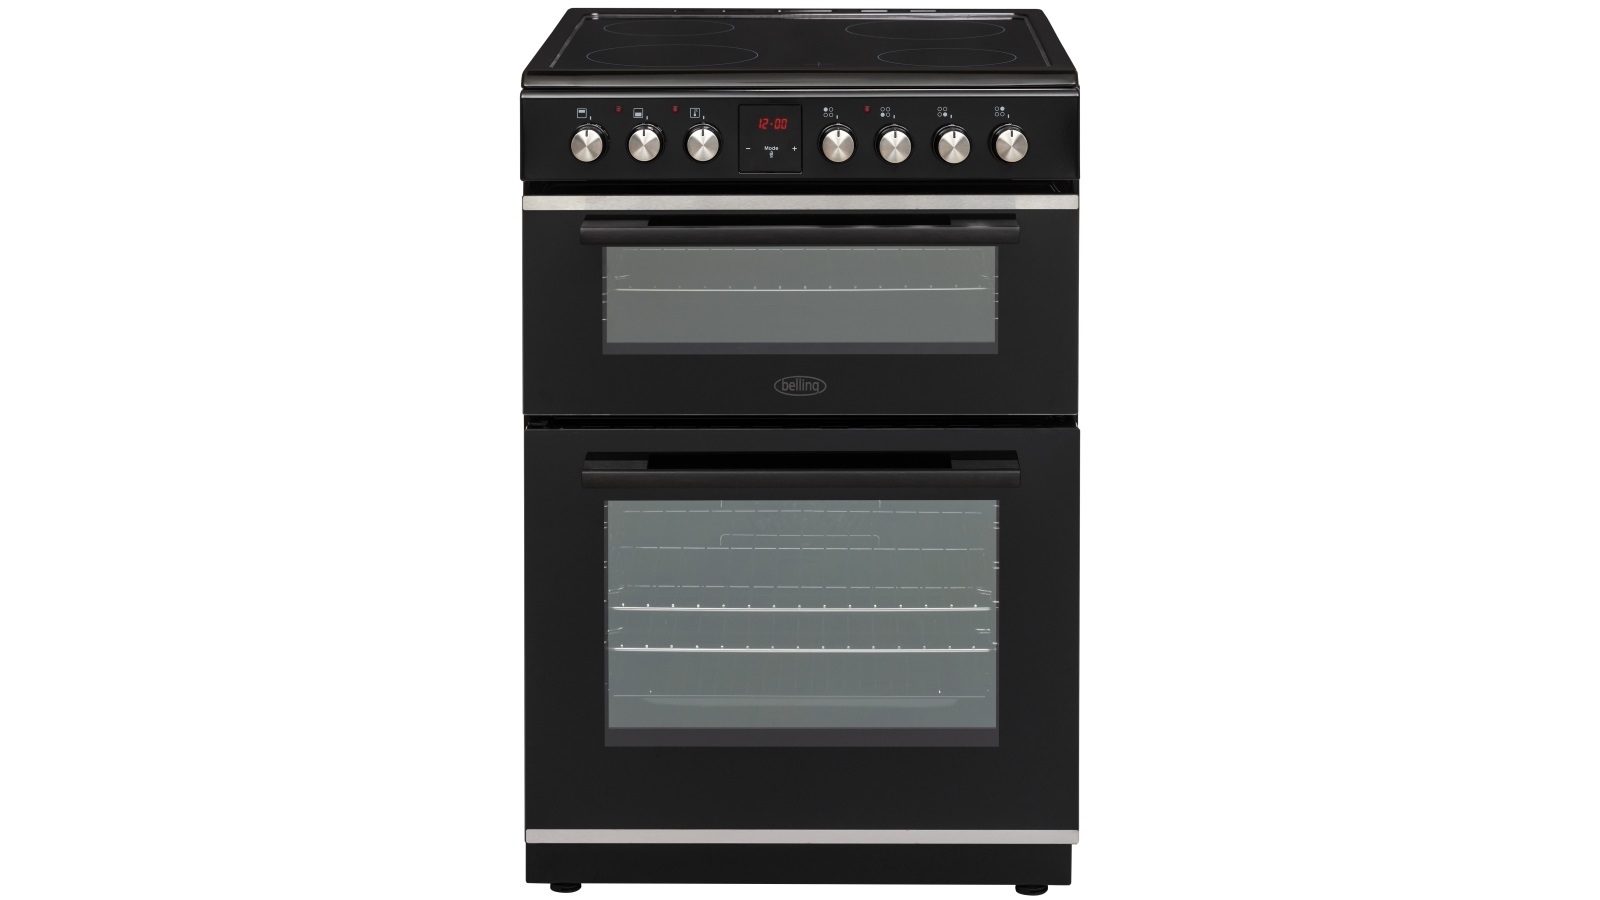 600mm freestanding electric oven